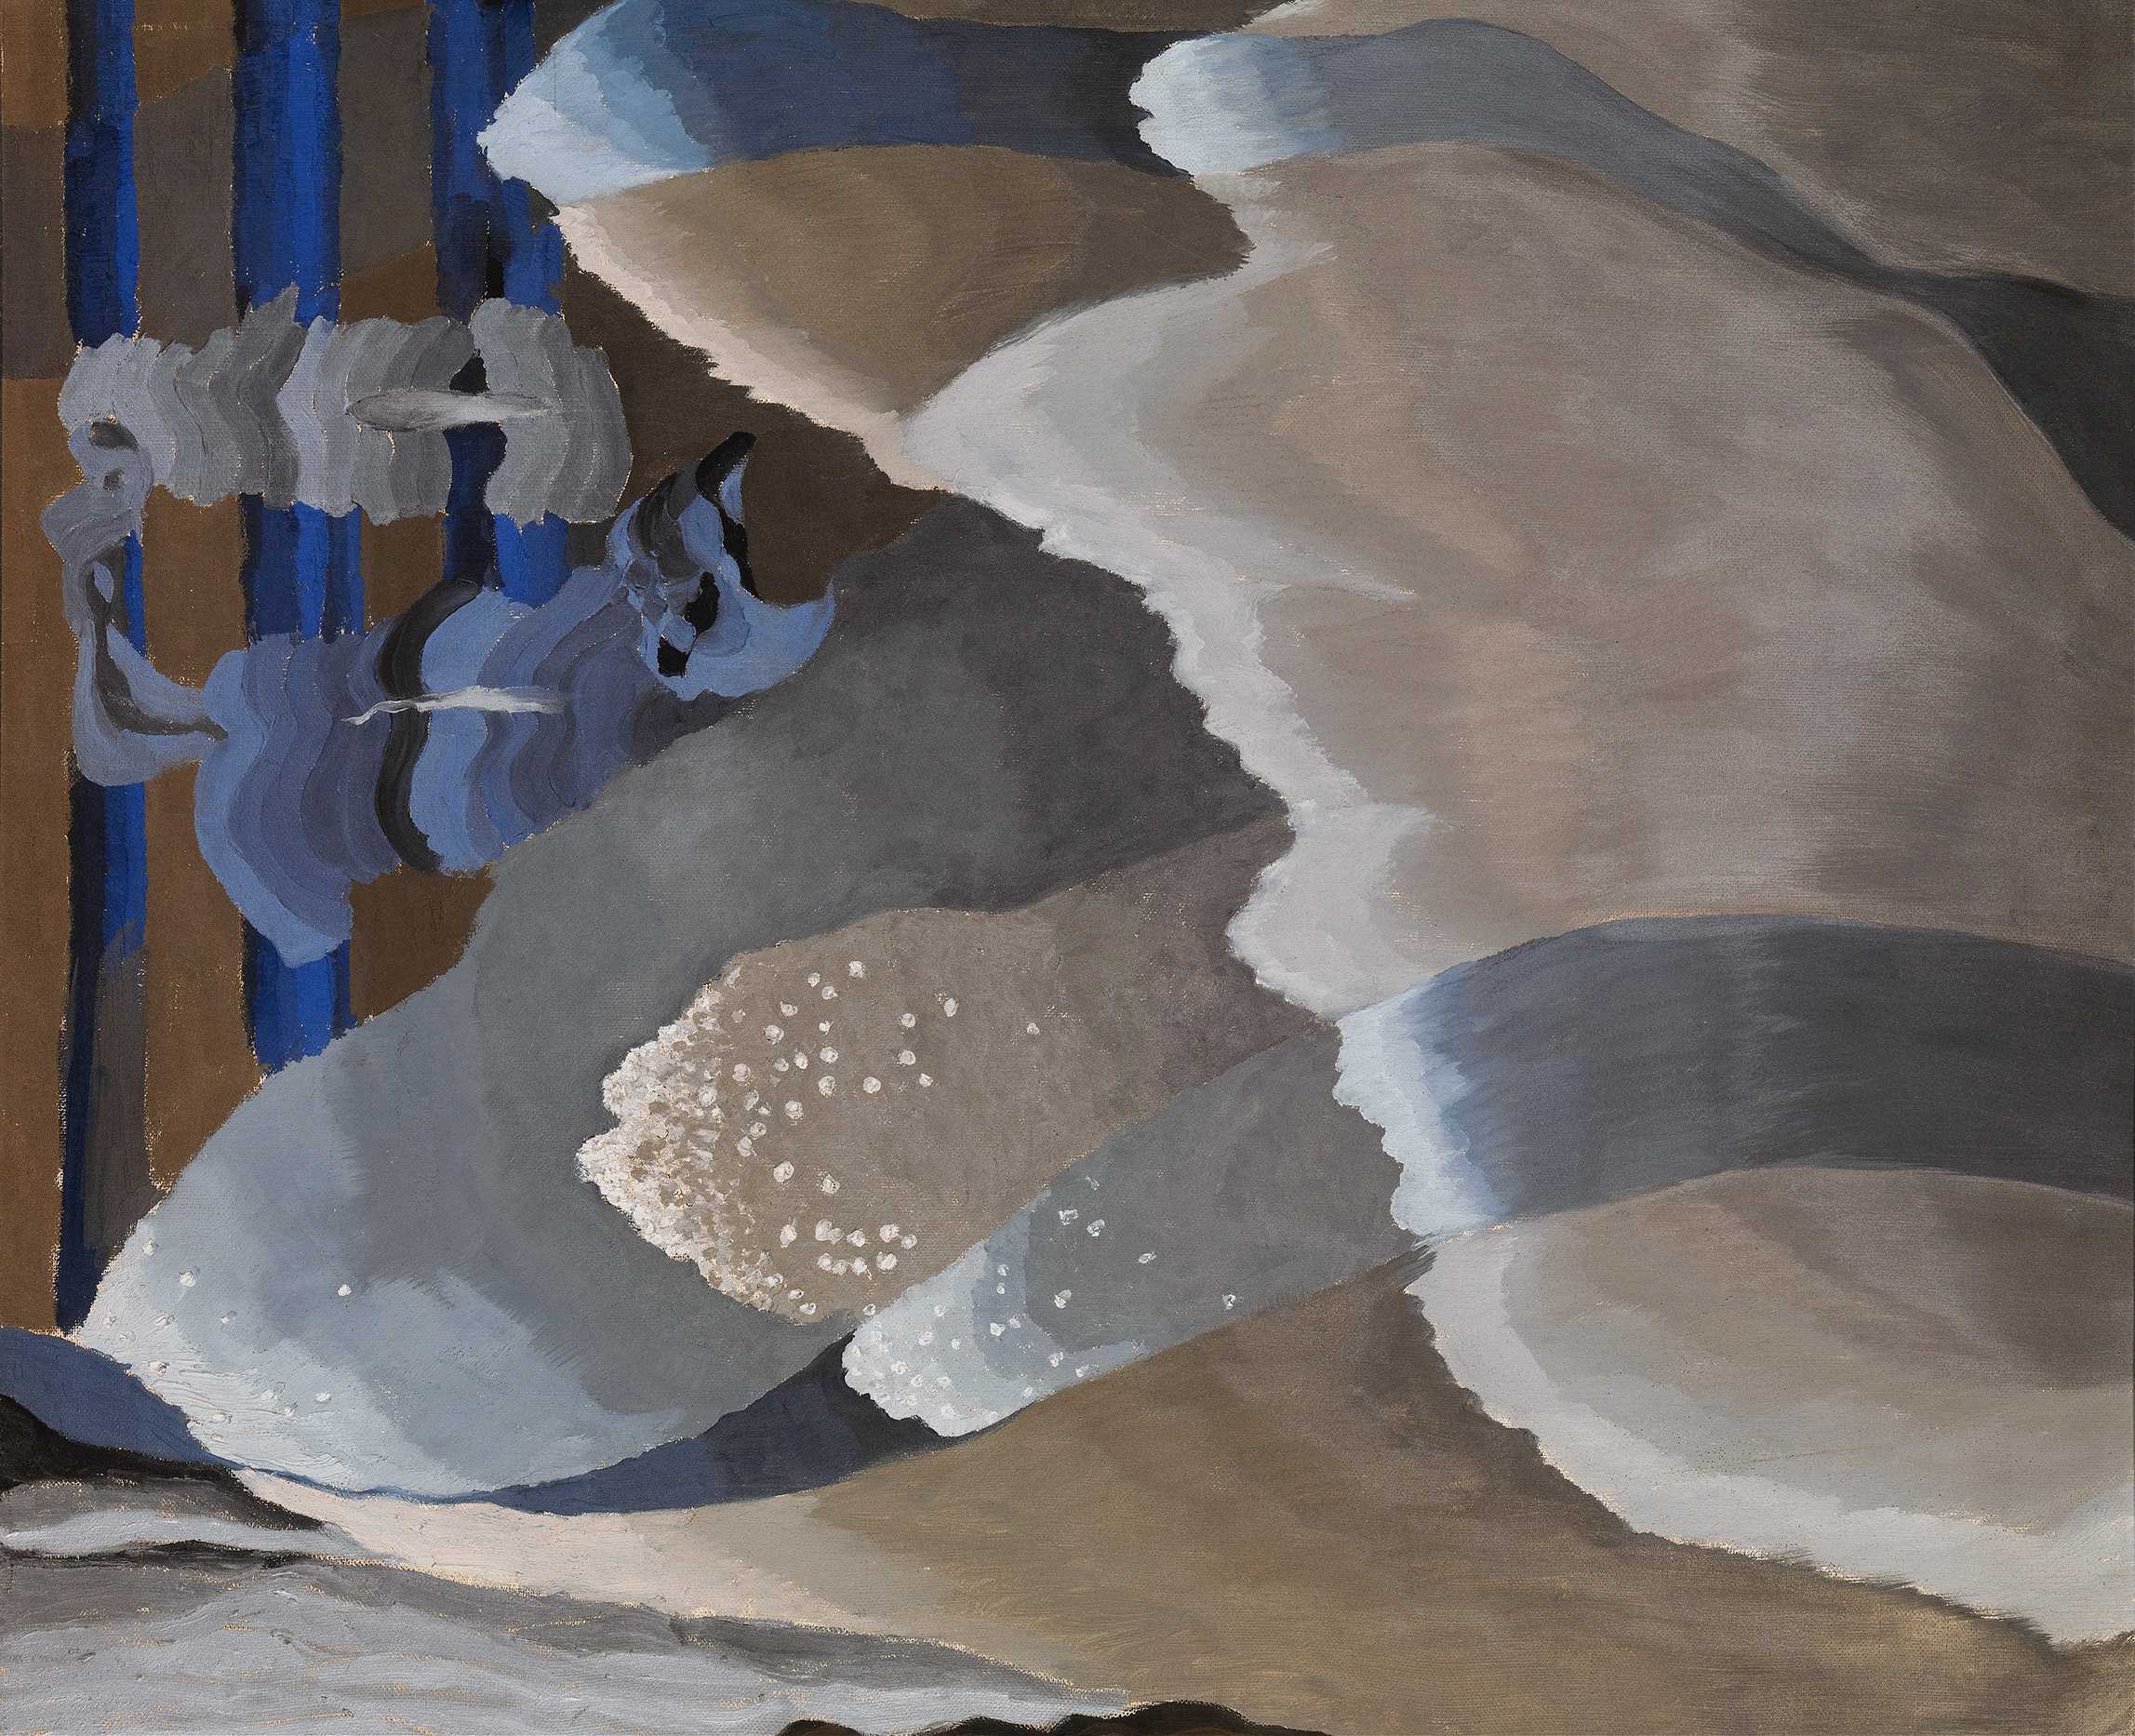 Find out more about Arthur Dove - Reaching Waves